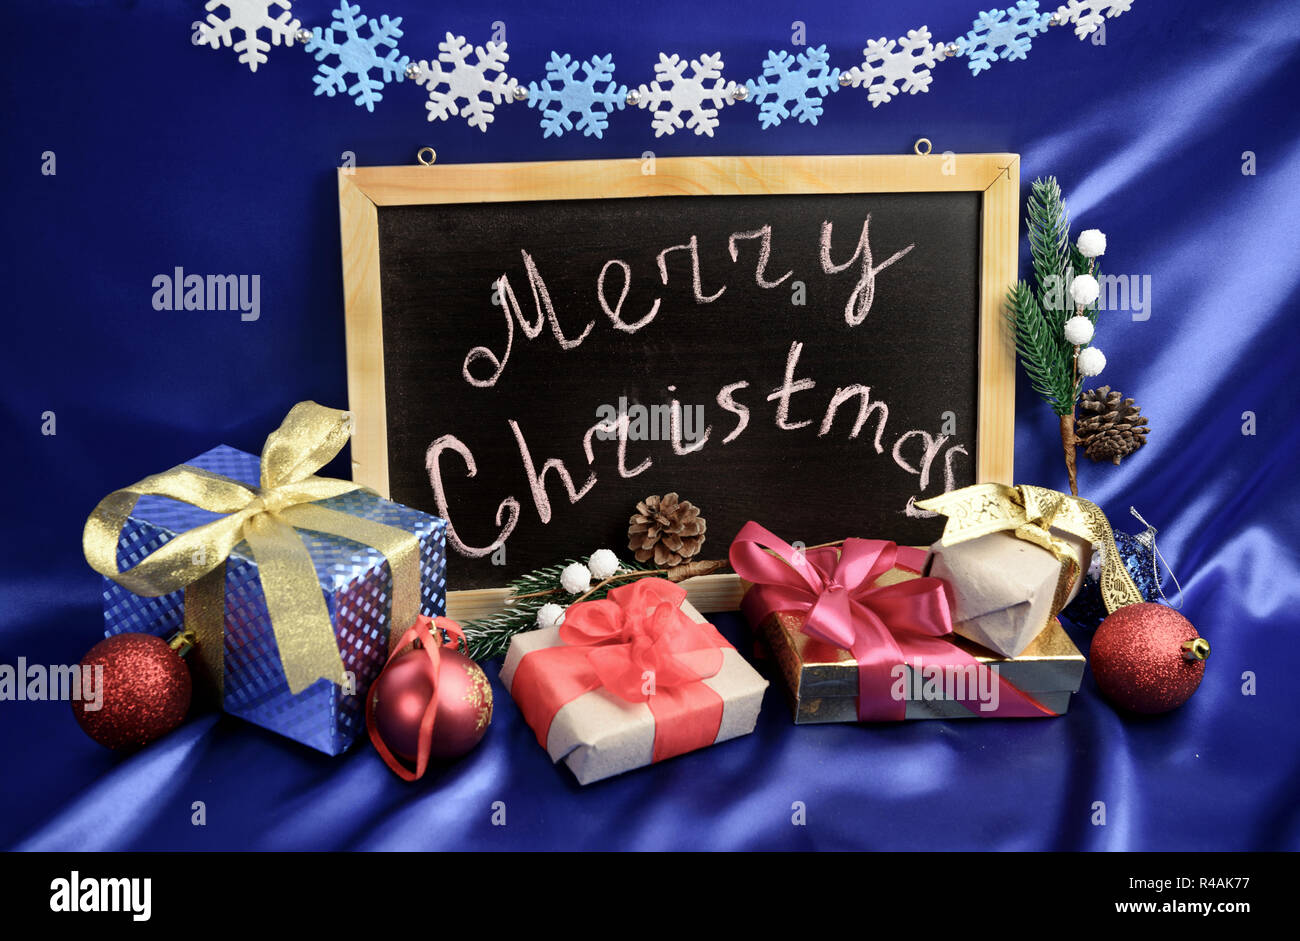 Christmas greeting at chalkboard around gift boxes and evergreen decorations on blue silk background Stock Photo